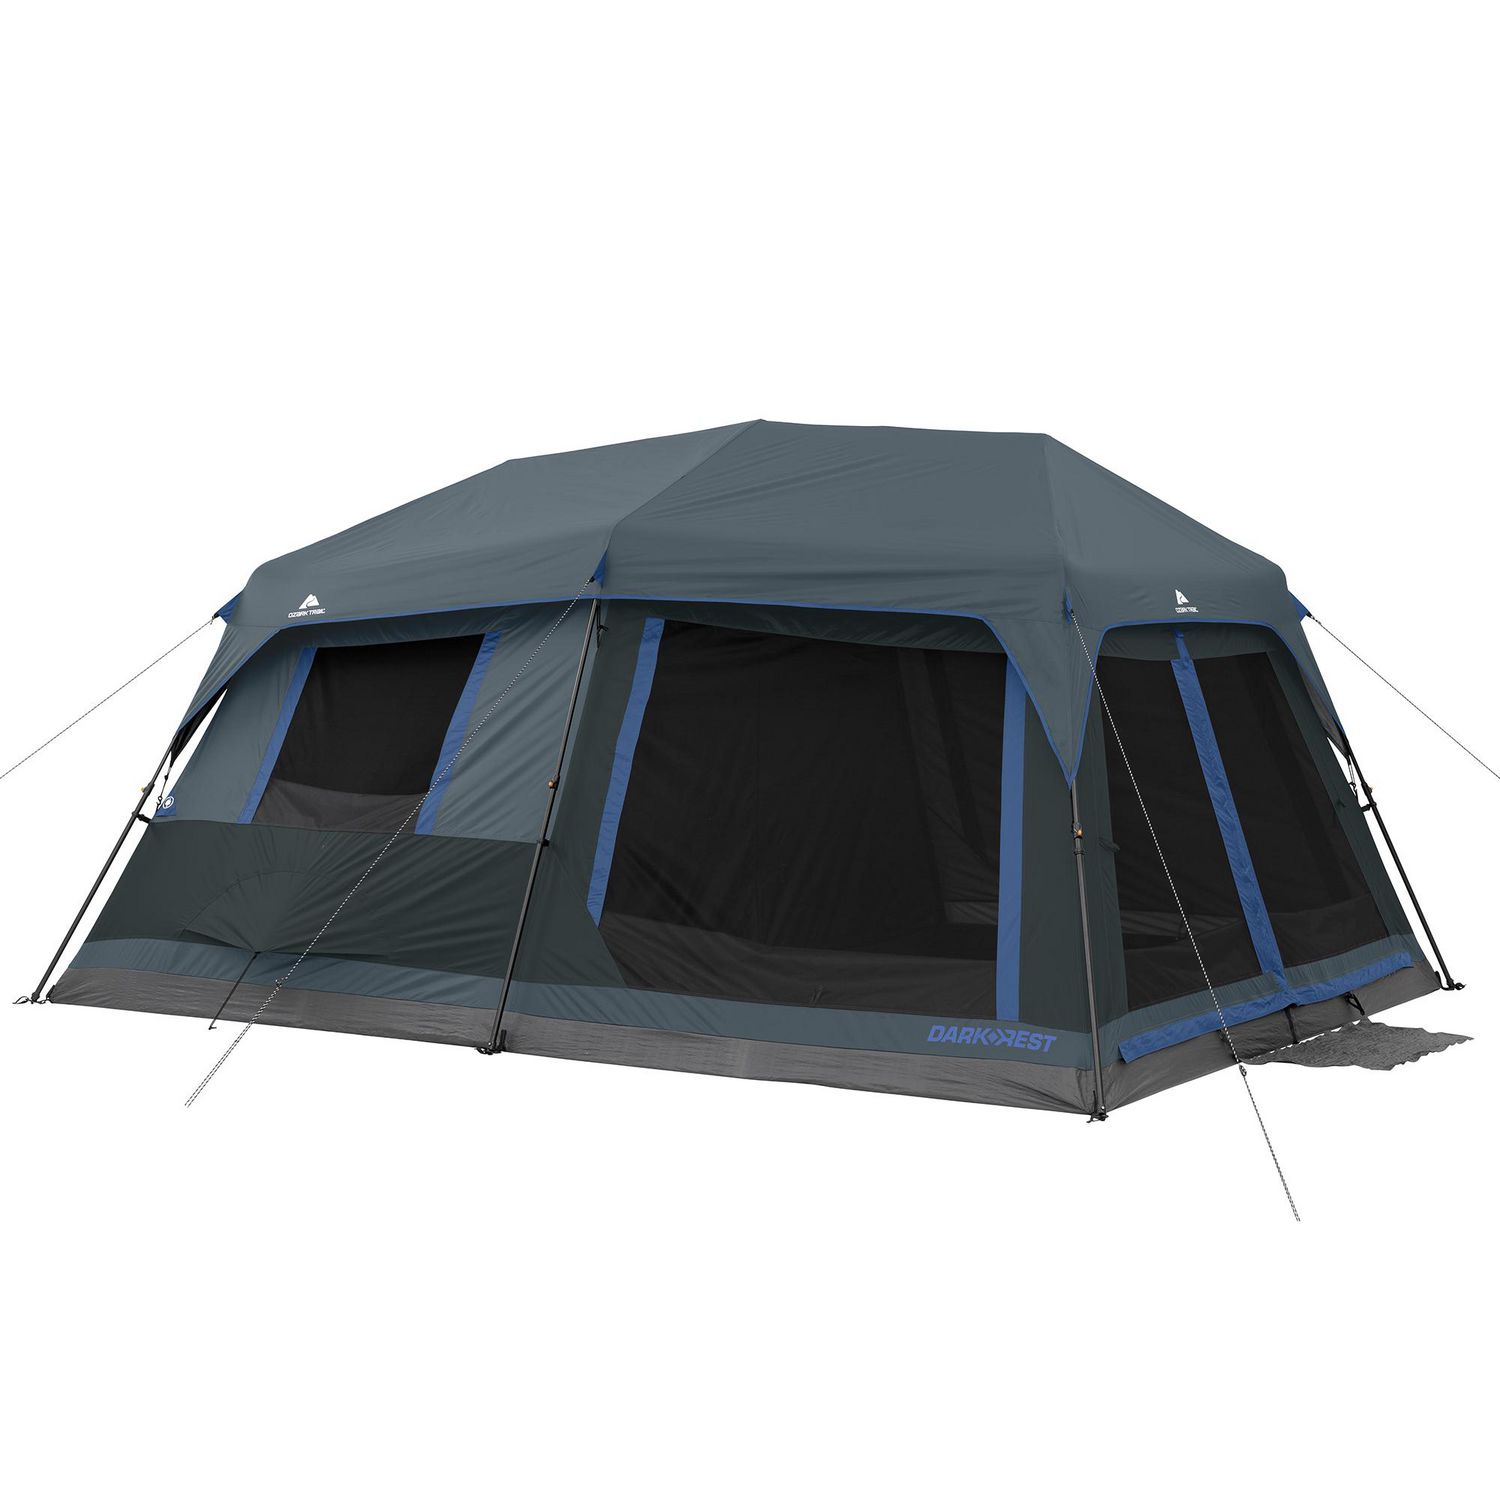 CORE 12 Person Tent | Large Multi Room Camping Tent for Outdoor Family  Camping | Portable Cabin Stand Up Tent with Storage Pockets for Camping